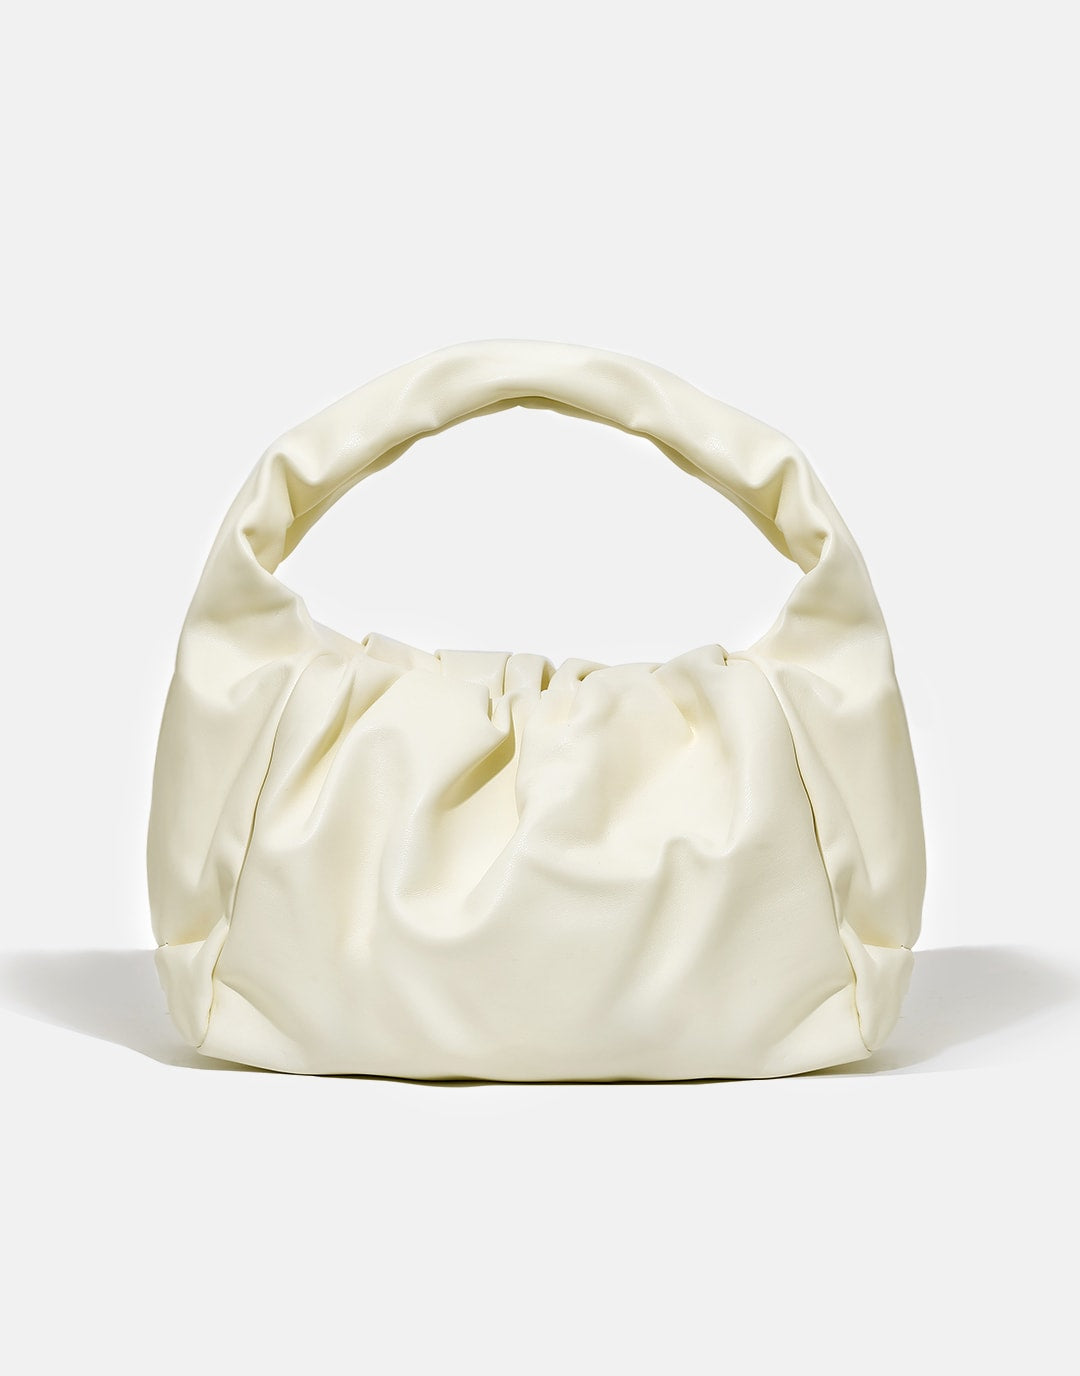 Soft Pleated Cloud Clutch Bag Solid Color Trend